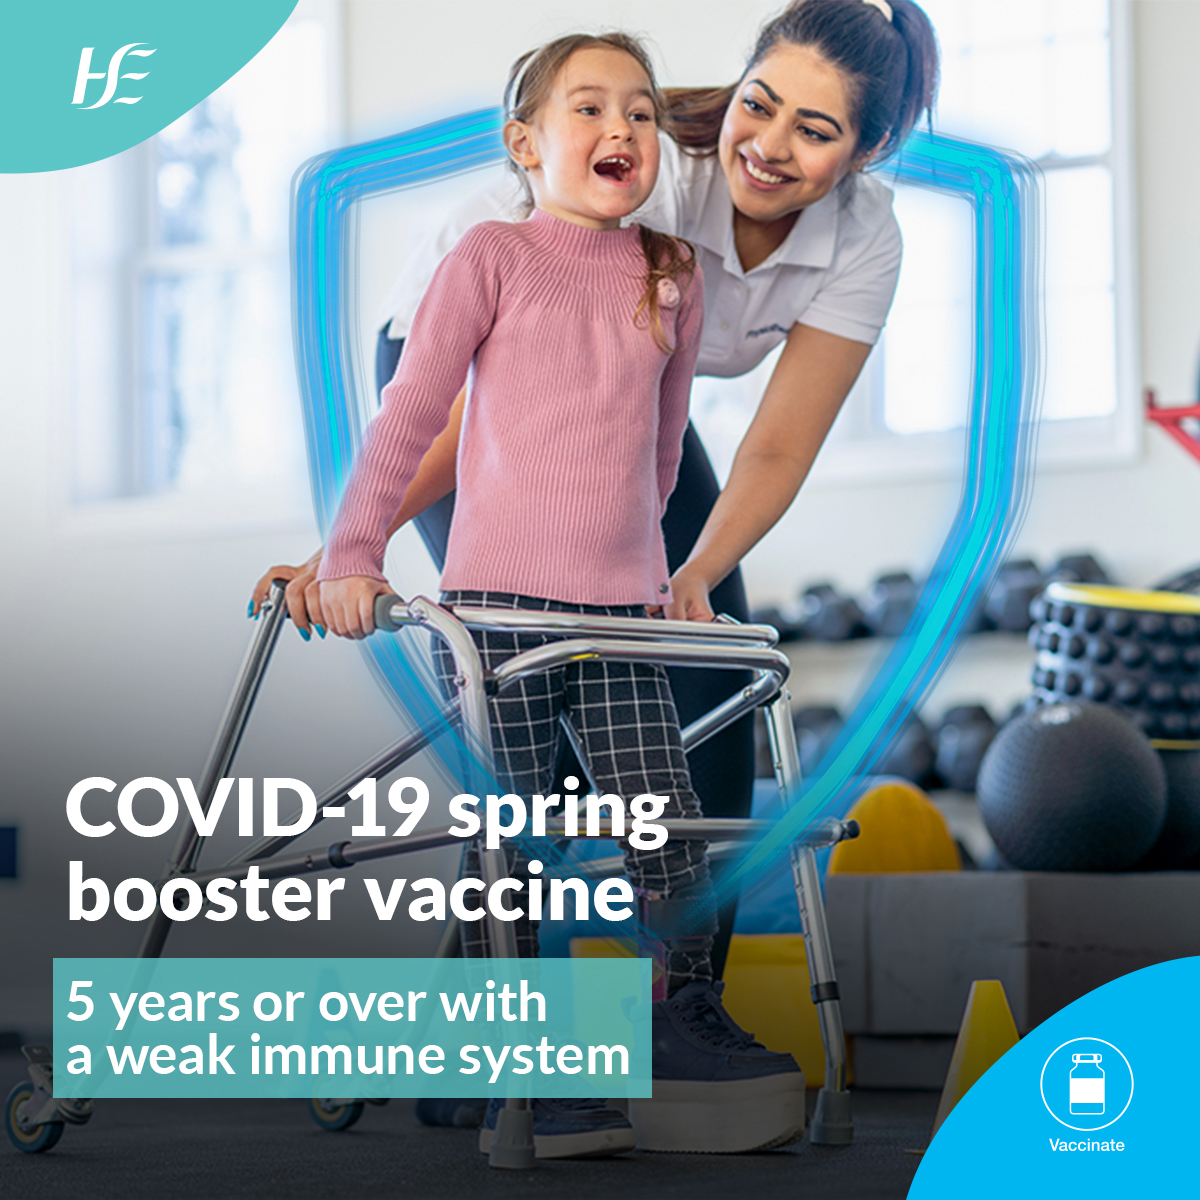 Getting vaccinated is the best way we can protect ourselves from COVID-19. If you have a weak immune system, it's time for your recommended spring booster. If you are due a spring booster, we may be in touch directly with a reminder. ➡️ bit.ly/3UCeqsR #COVIDVaccine